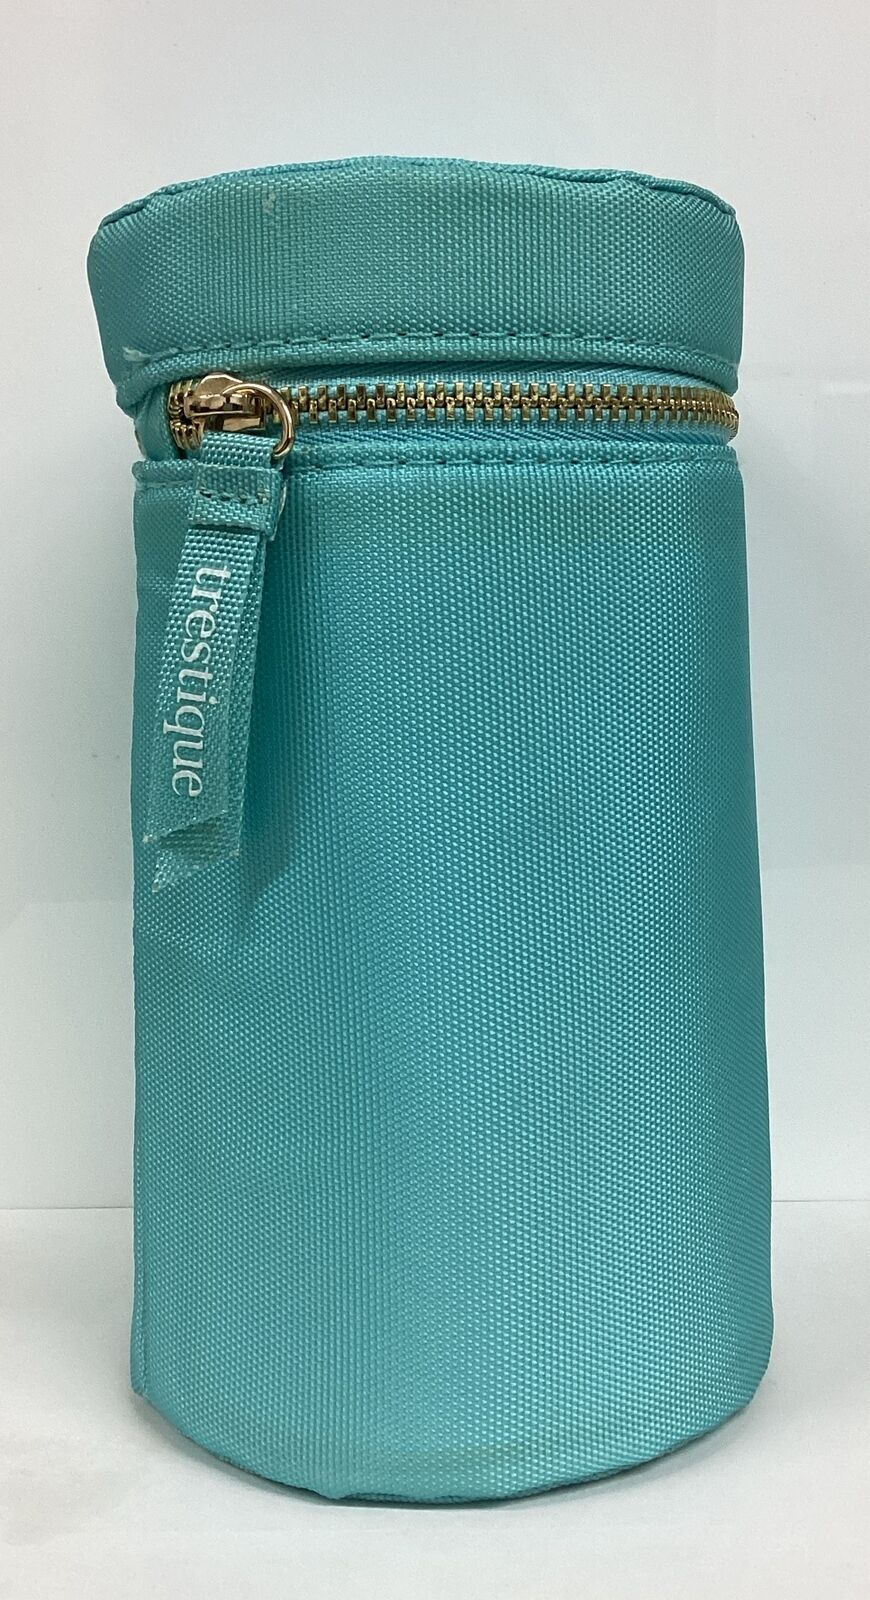 Trestique Make-up Bag Clean Ocean Collection SKY BLUE (XL) As Pictured